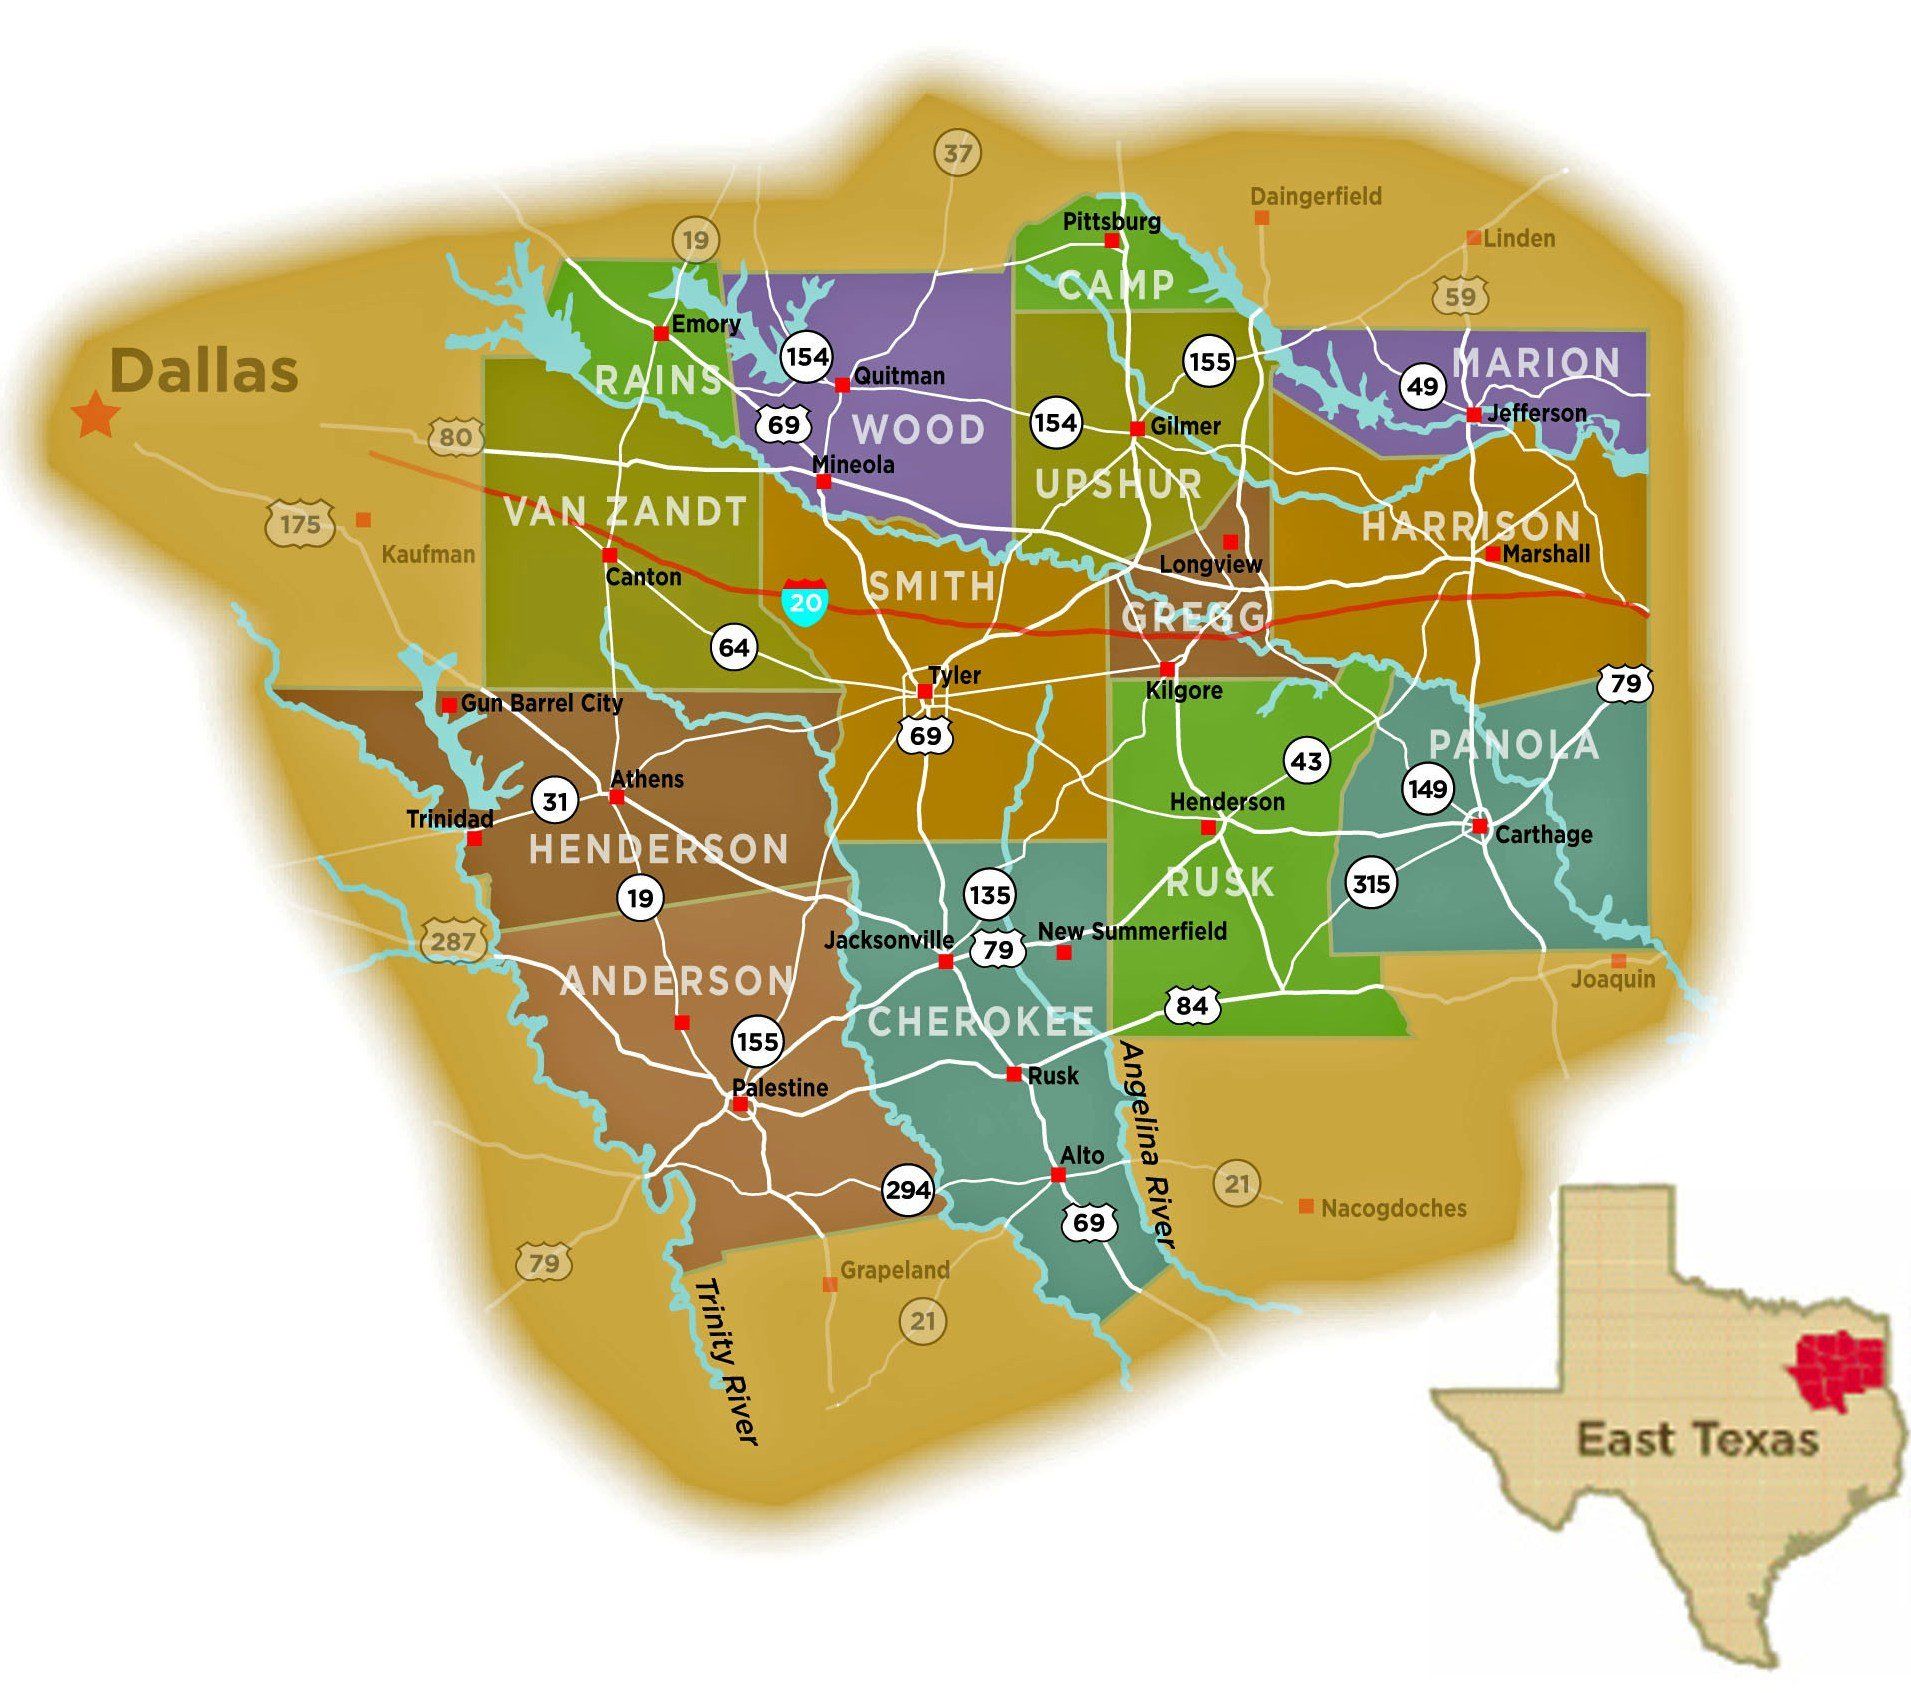 A map showing the location of dallas and east texas